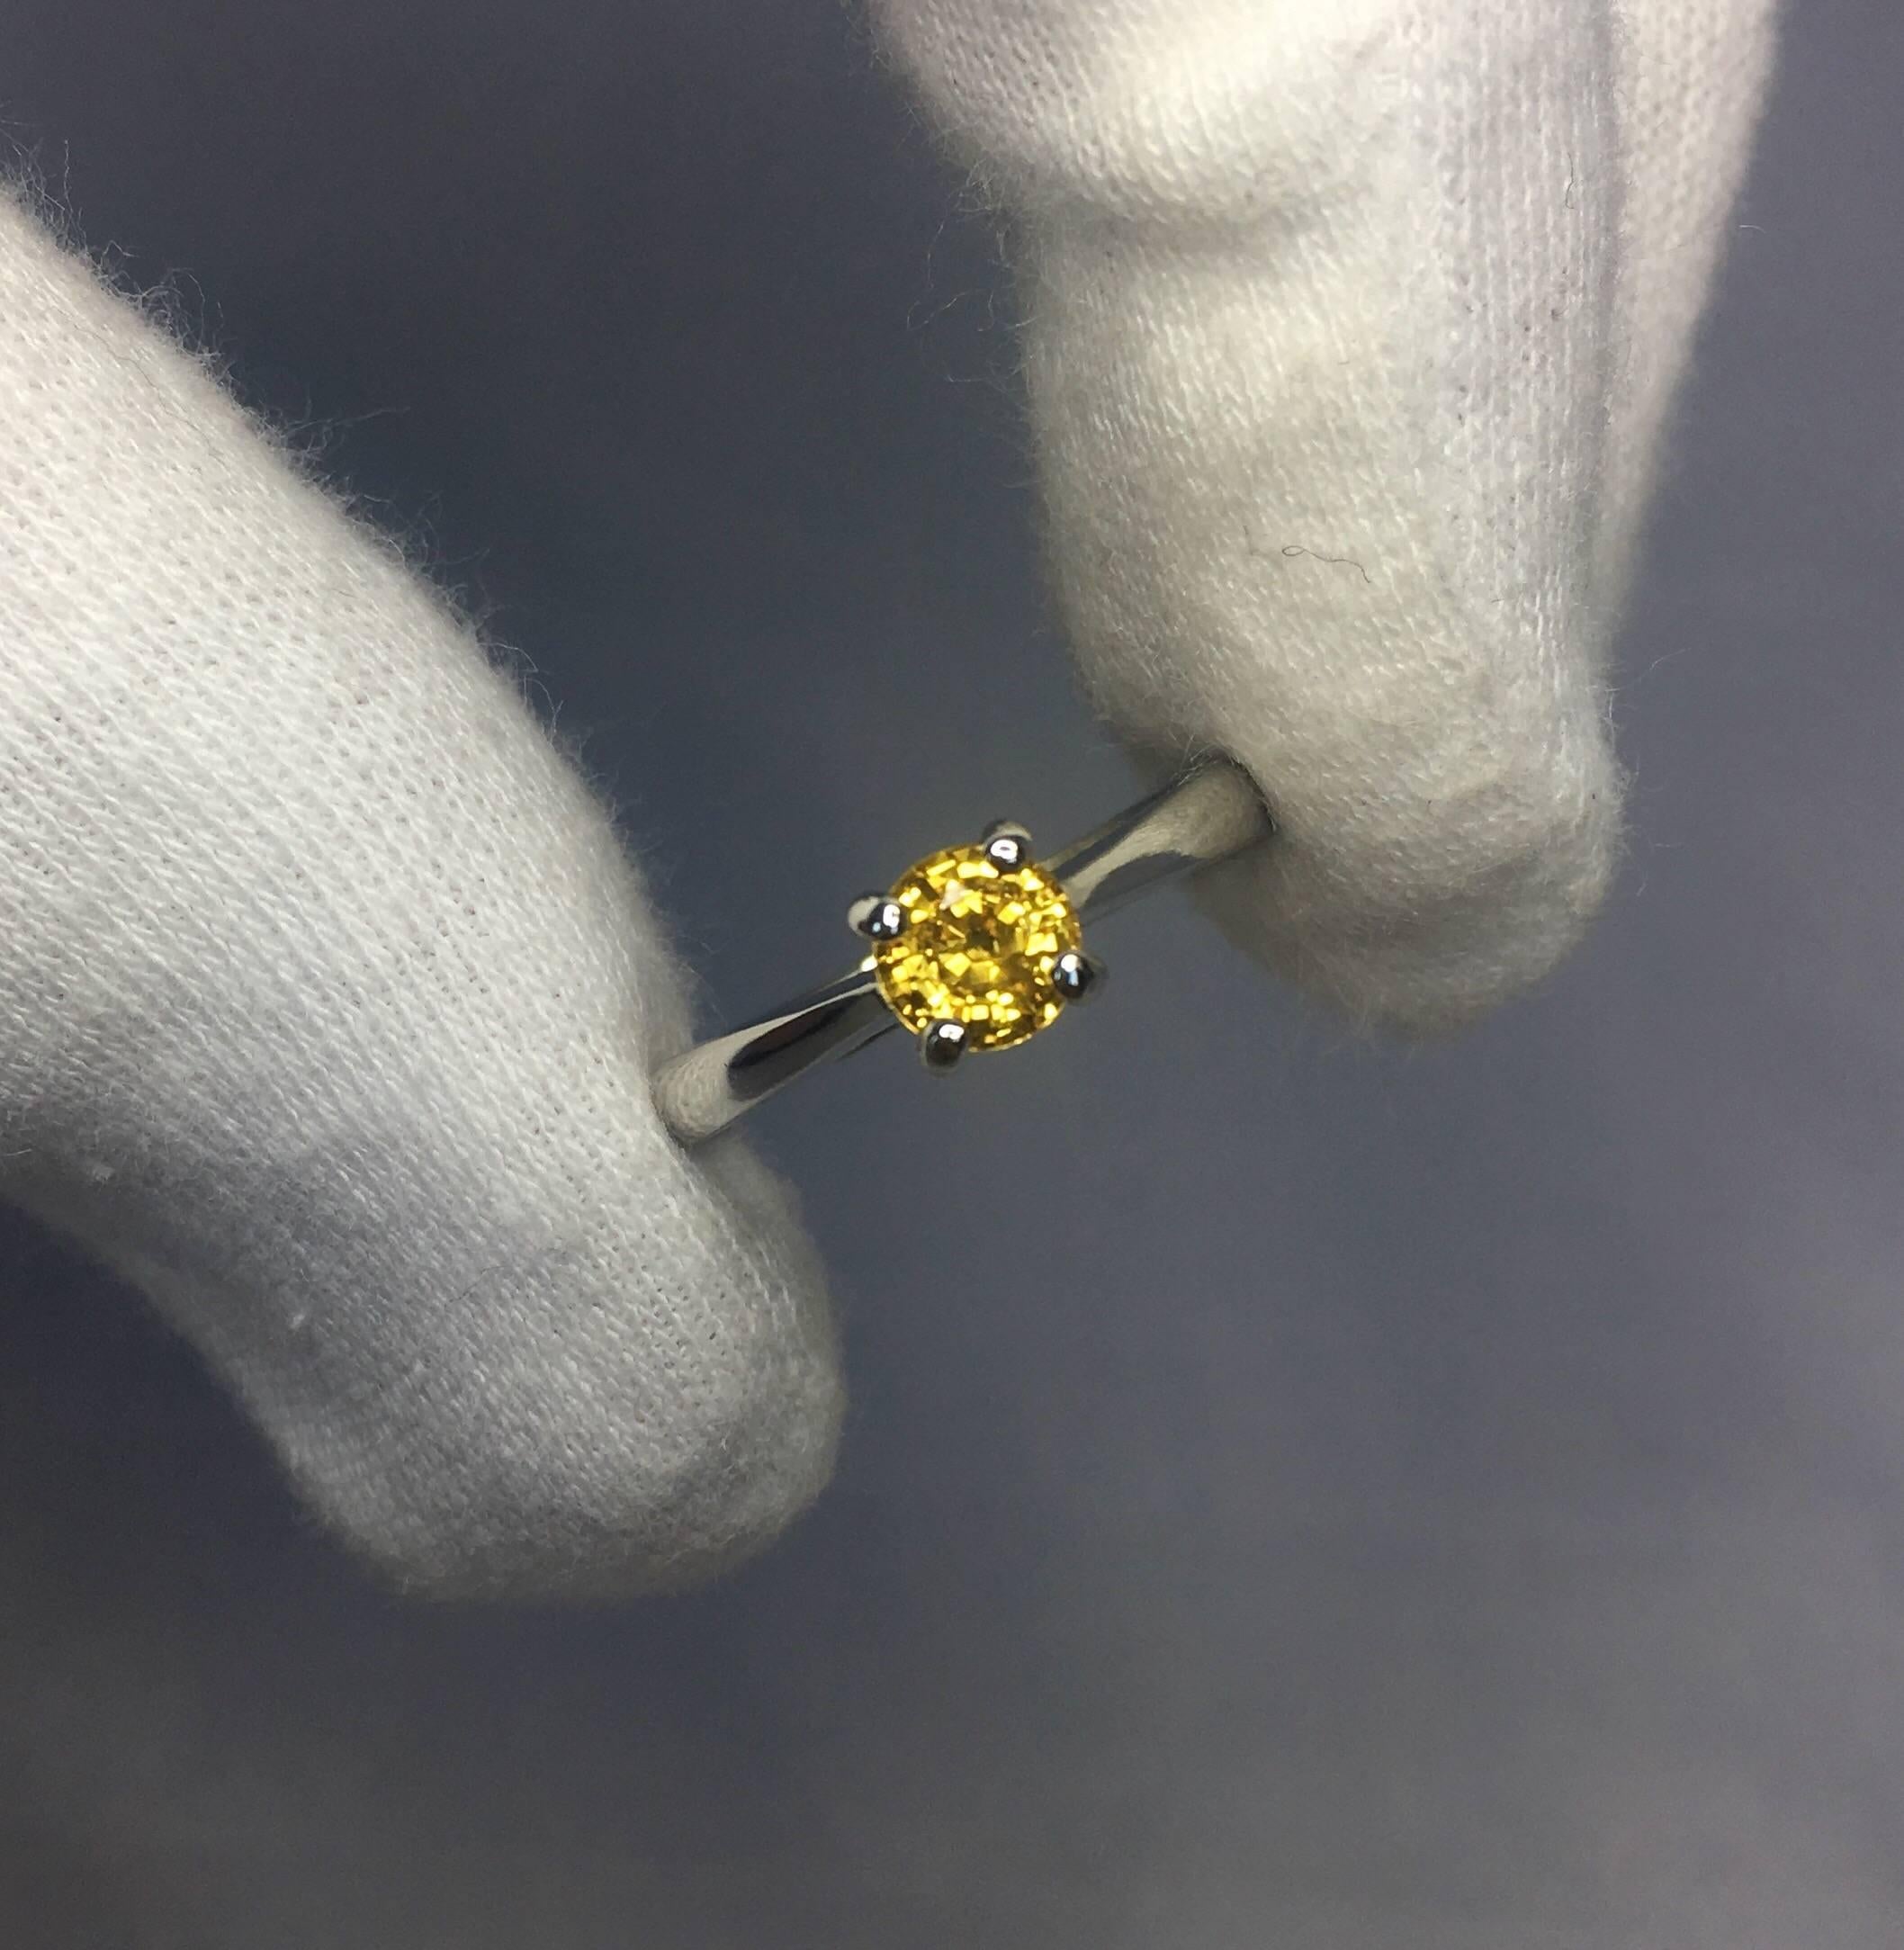 Natural vivid yellow Ceylon sapphire set in a beautiful 950 platinum setting. 

0.65 carat stone with vivid colour and superb clarity. very clean stone.

Has an excellent round brilliant cut which shows lots of sparkle and light return. Looks even